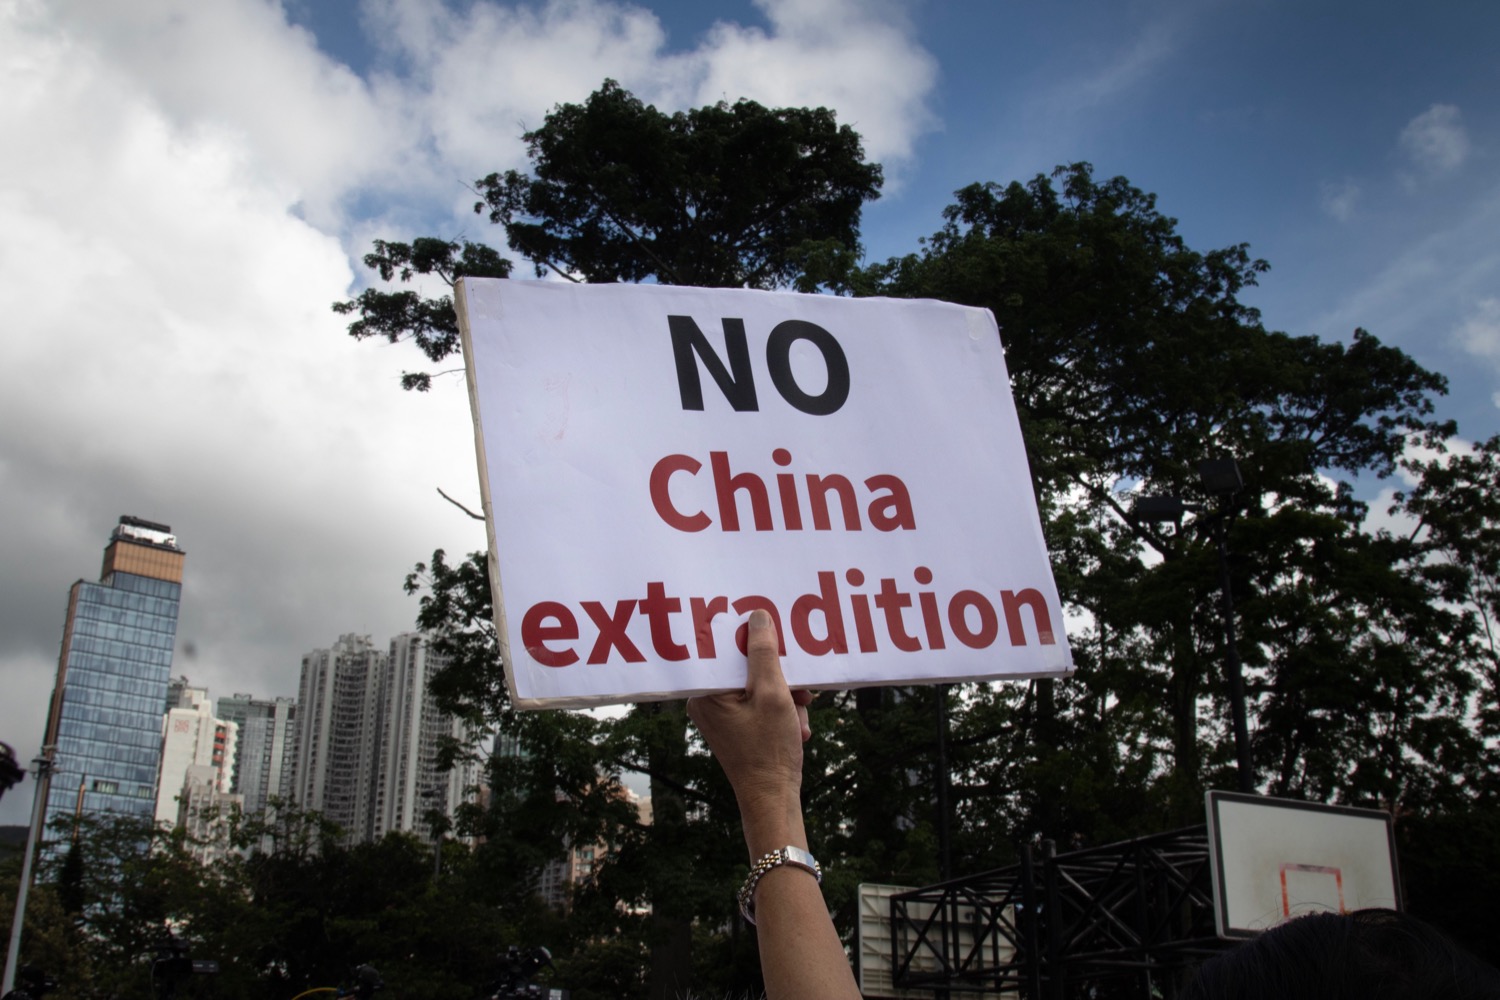 A protester holds up a “no China extradition” sign during a march on June 9, 2019. Photo by Samantha Mei Topp.